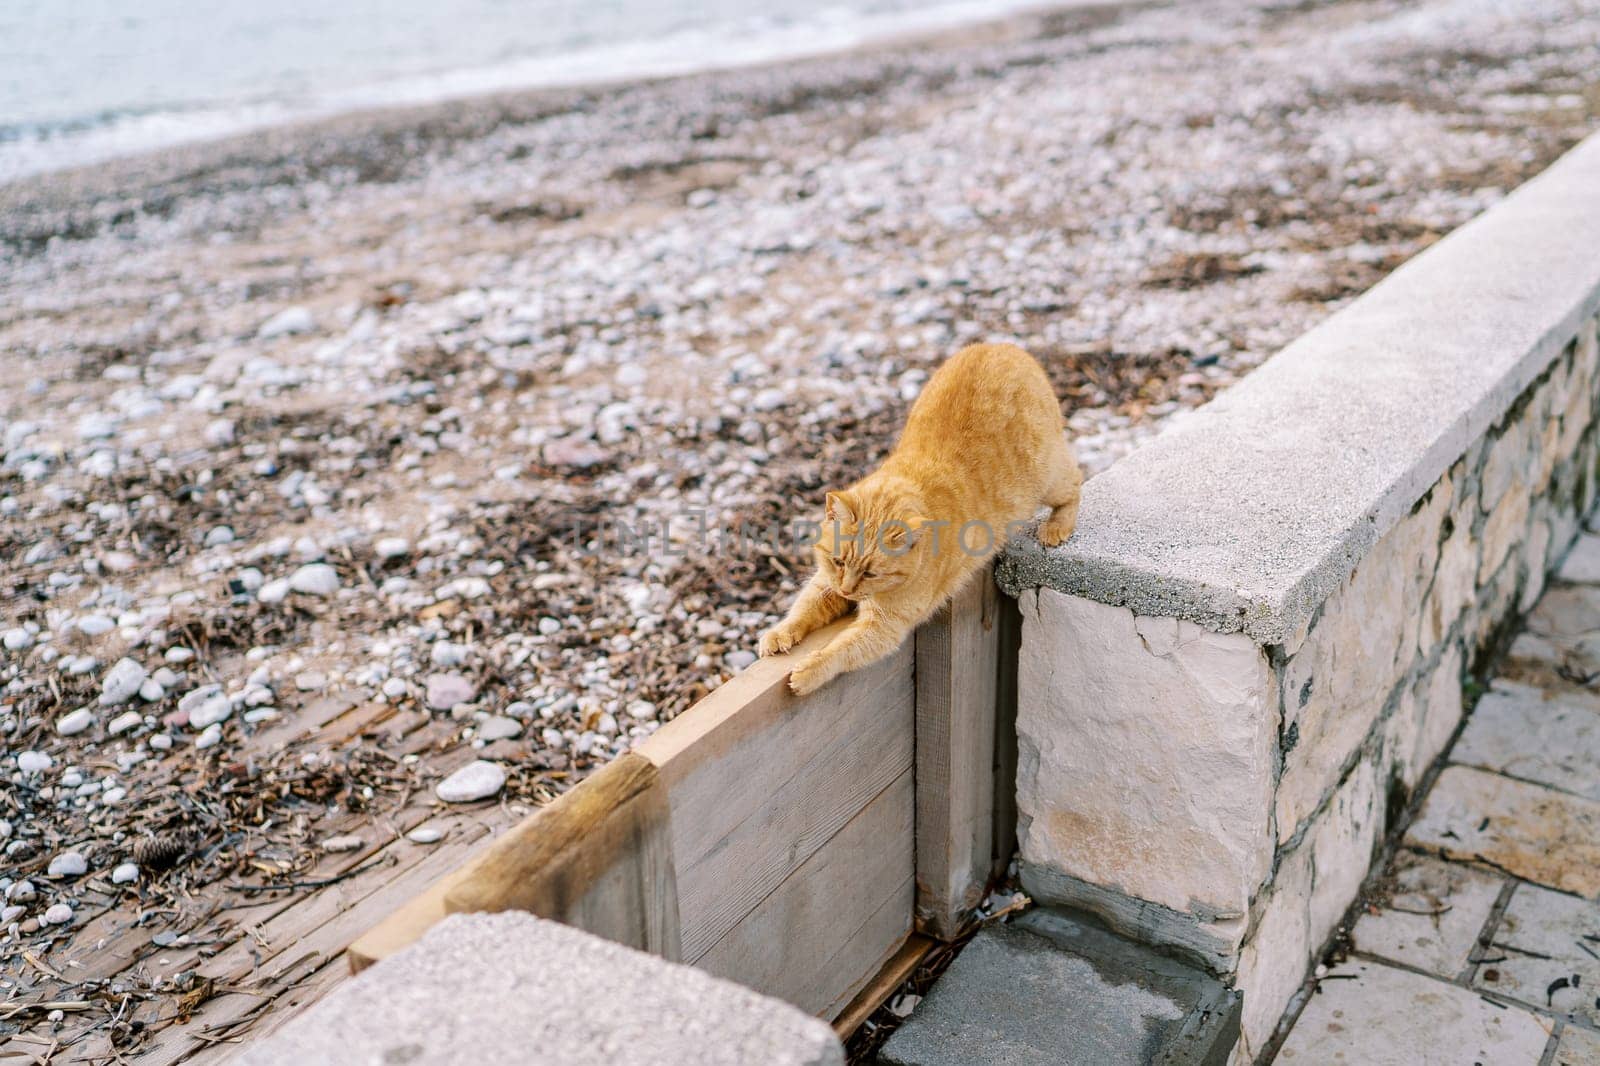 Ginger cat sharpens its claws on a wooden door in a stone fence by the sea by Nadtochiy